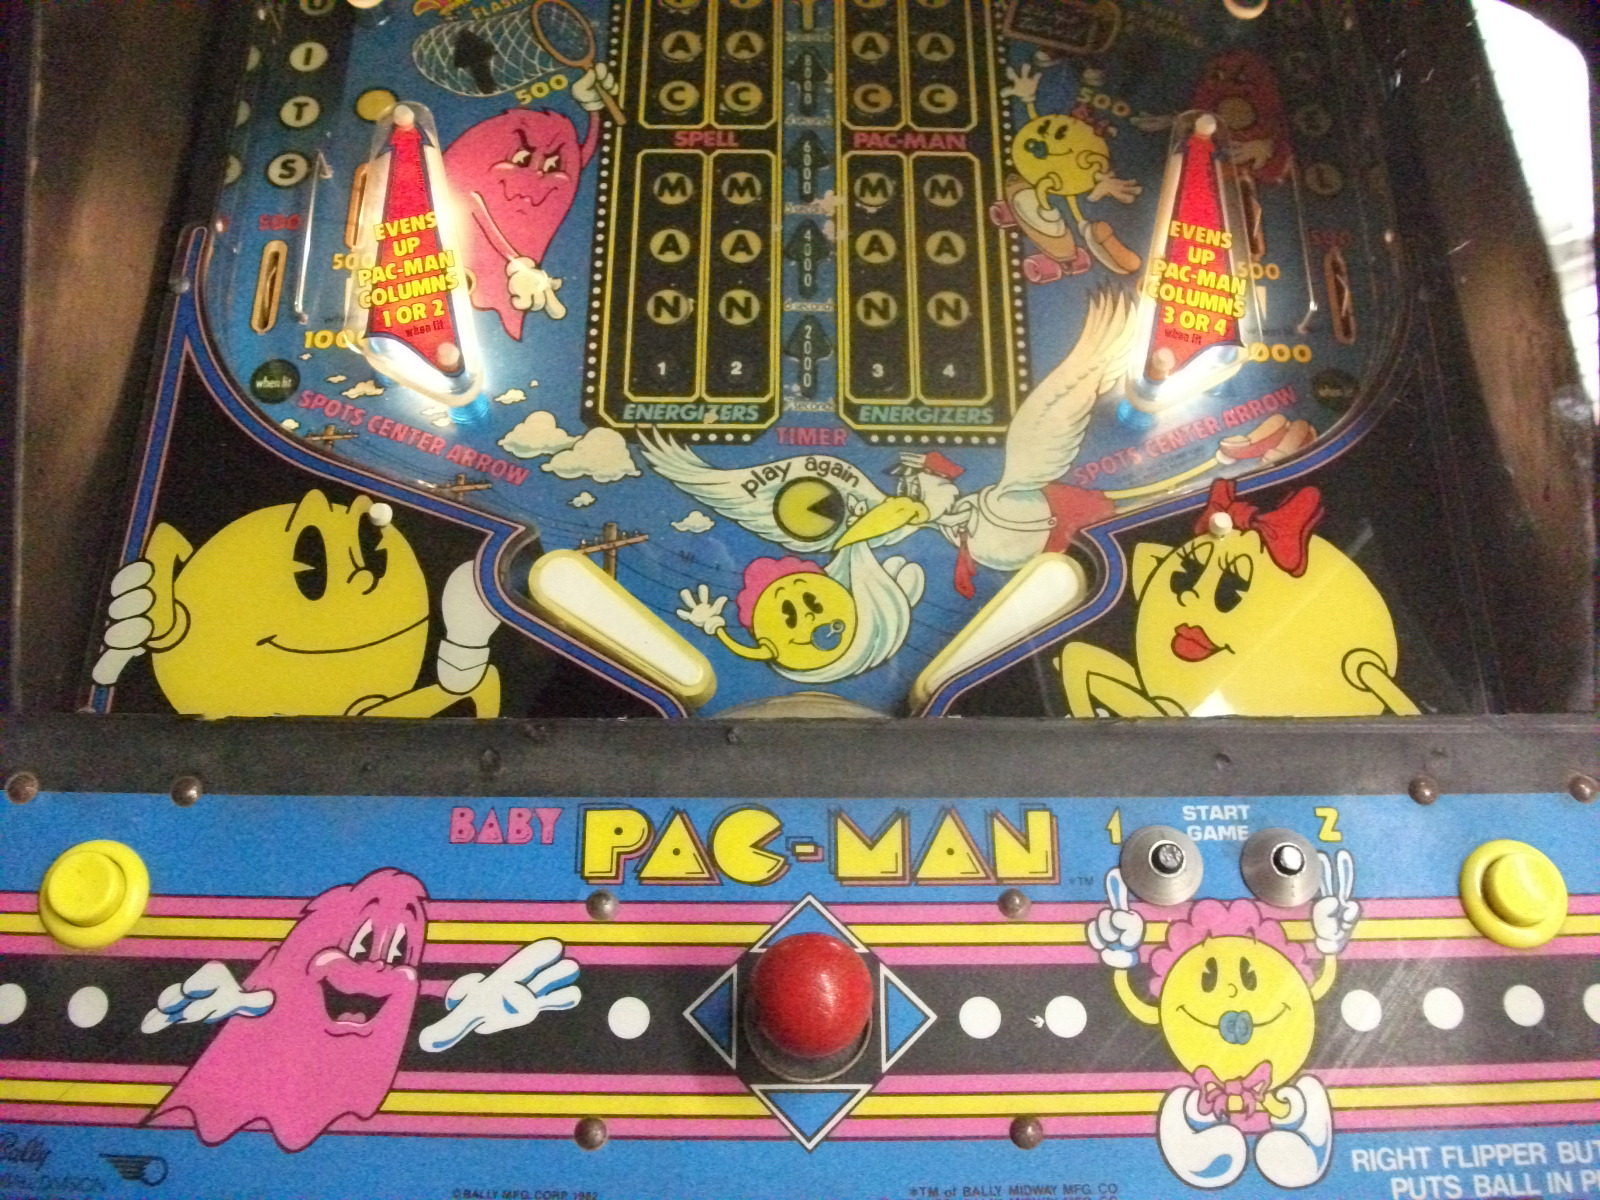 Baby PacMan - Details